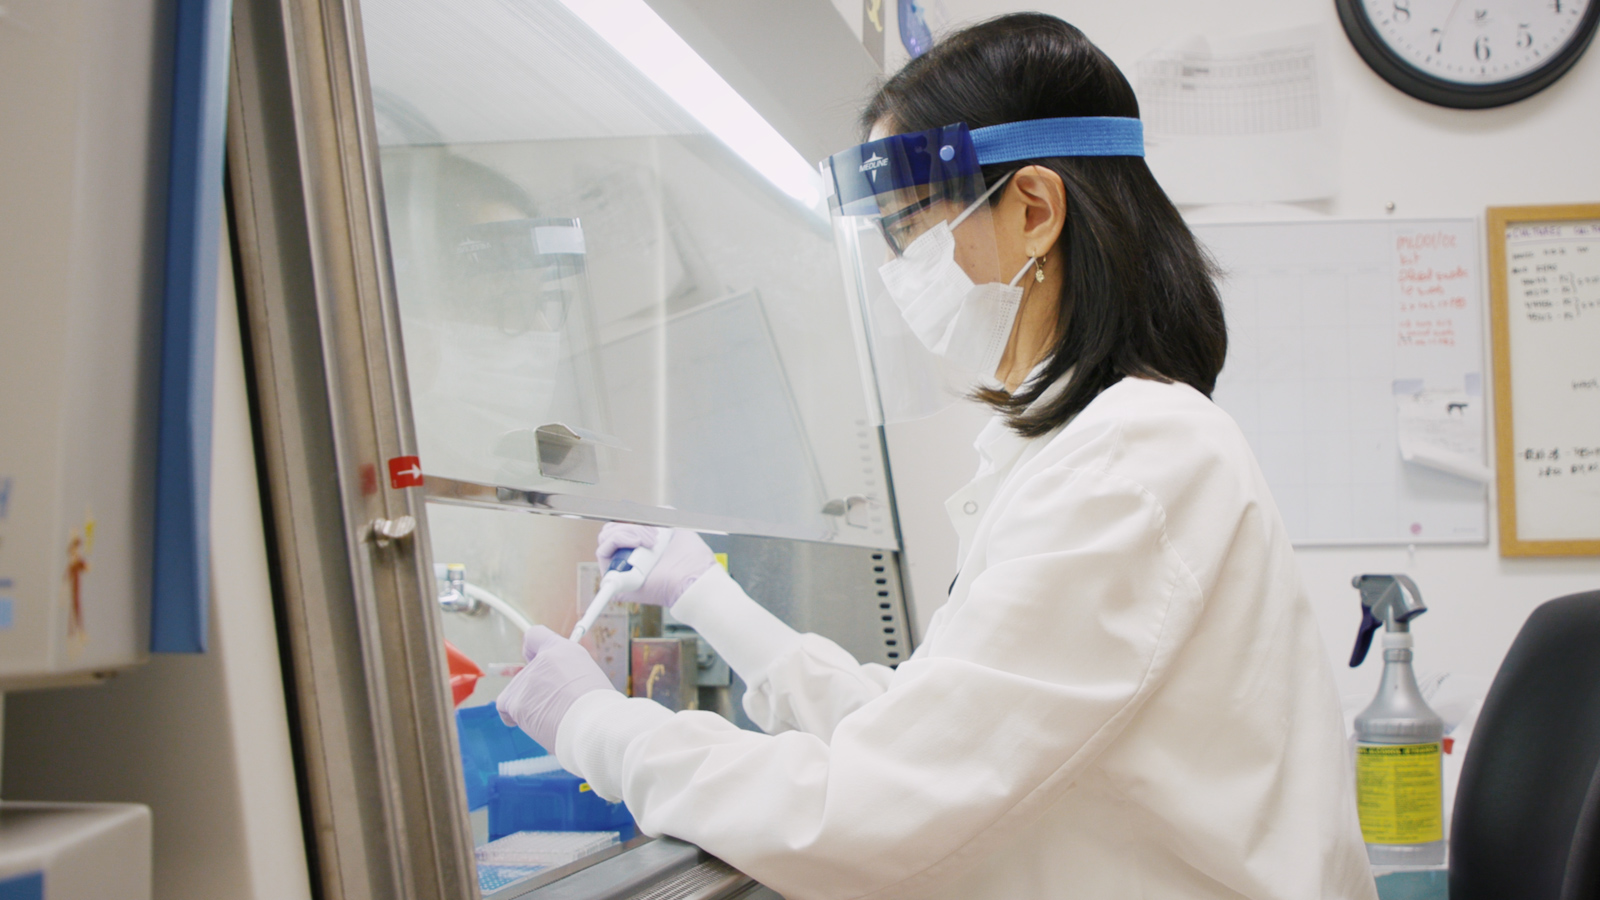 A woman wearing a face shield and a paper medical mask works with a pipette under an instrument hood in a lab